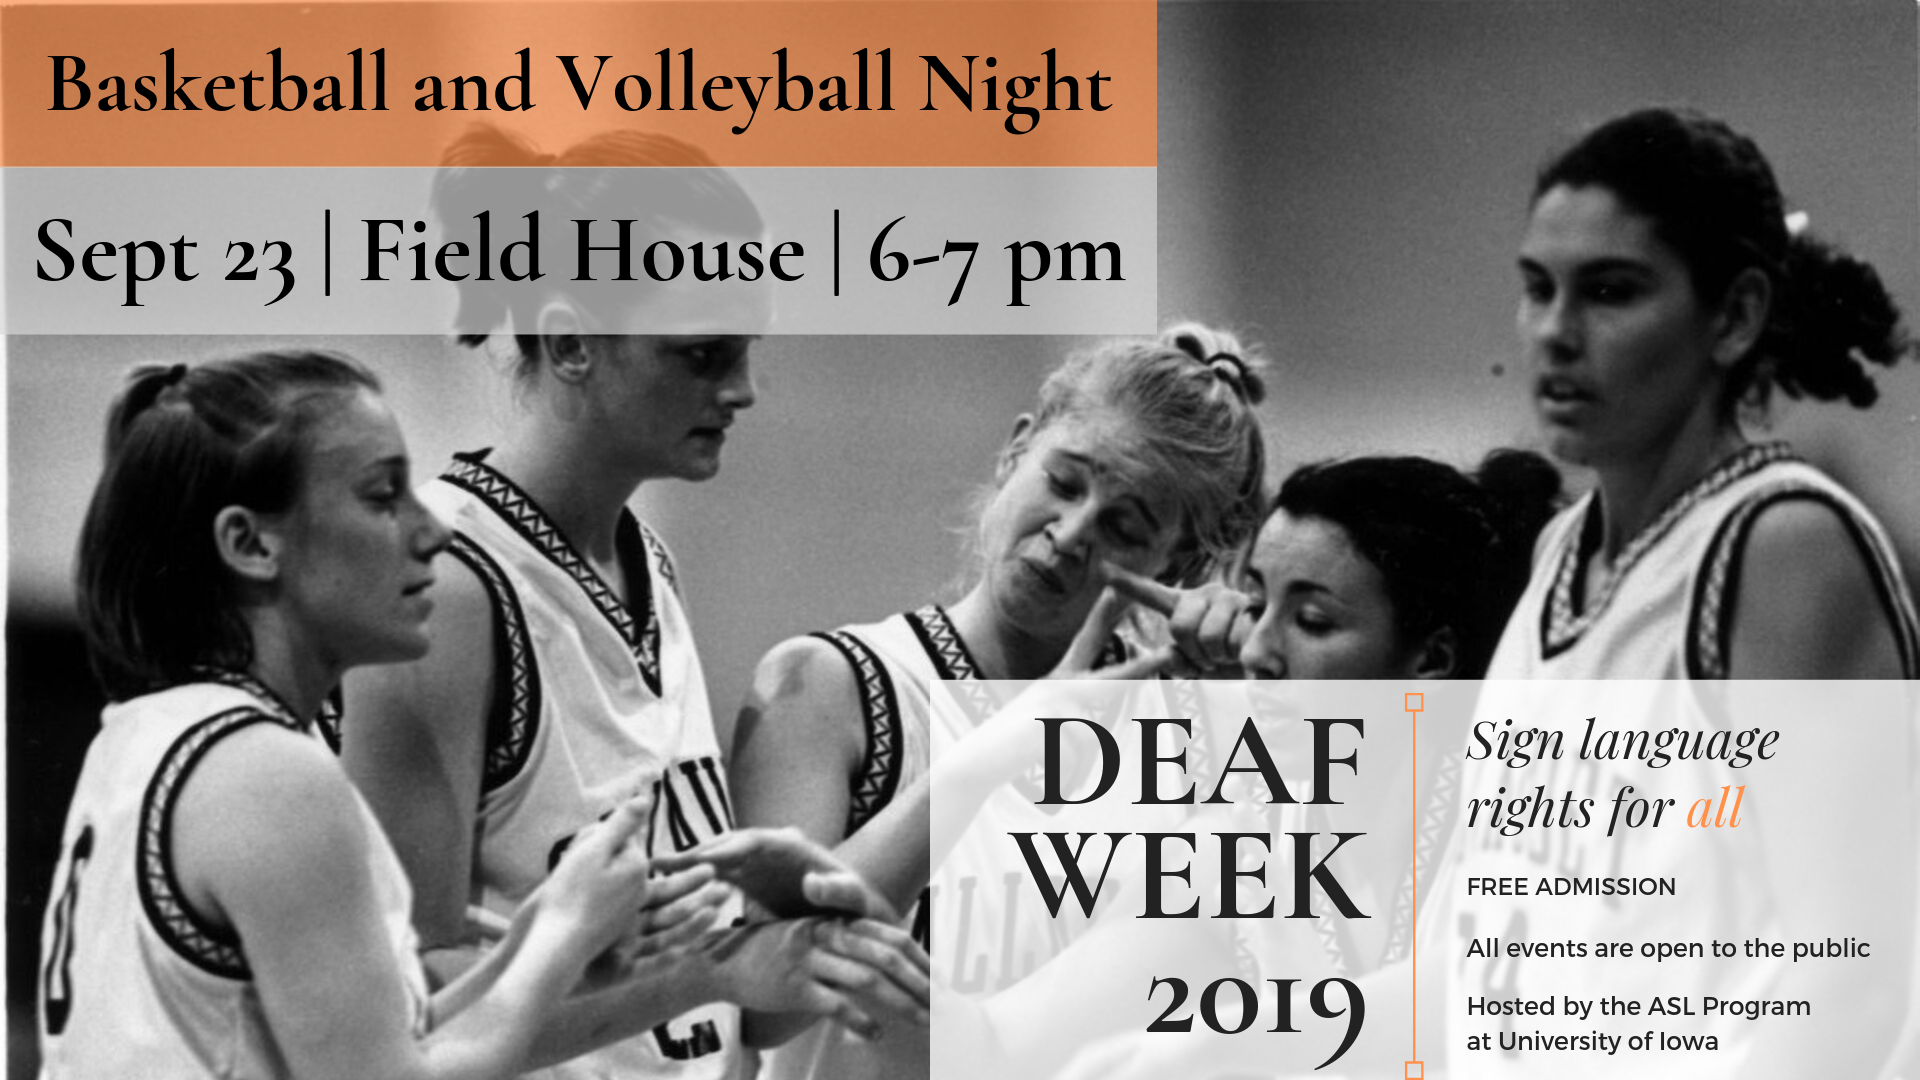 Basketball and Volleyball Night September 23 in the Field House from 6-7pm Deaf Week 2019 Sign language rights for all Free Admission All events are open to the public Hosted by the ASL Department at the University of Iowa